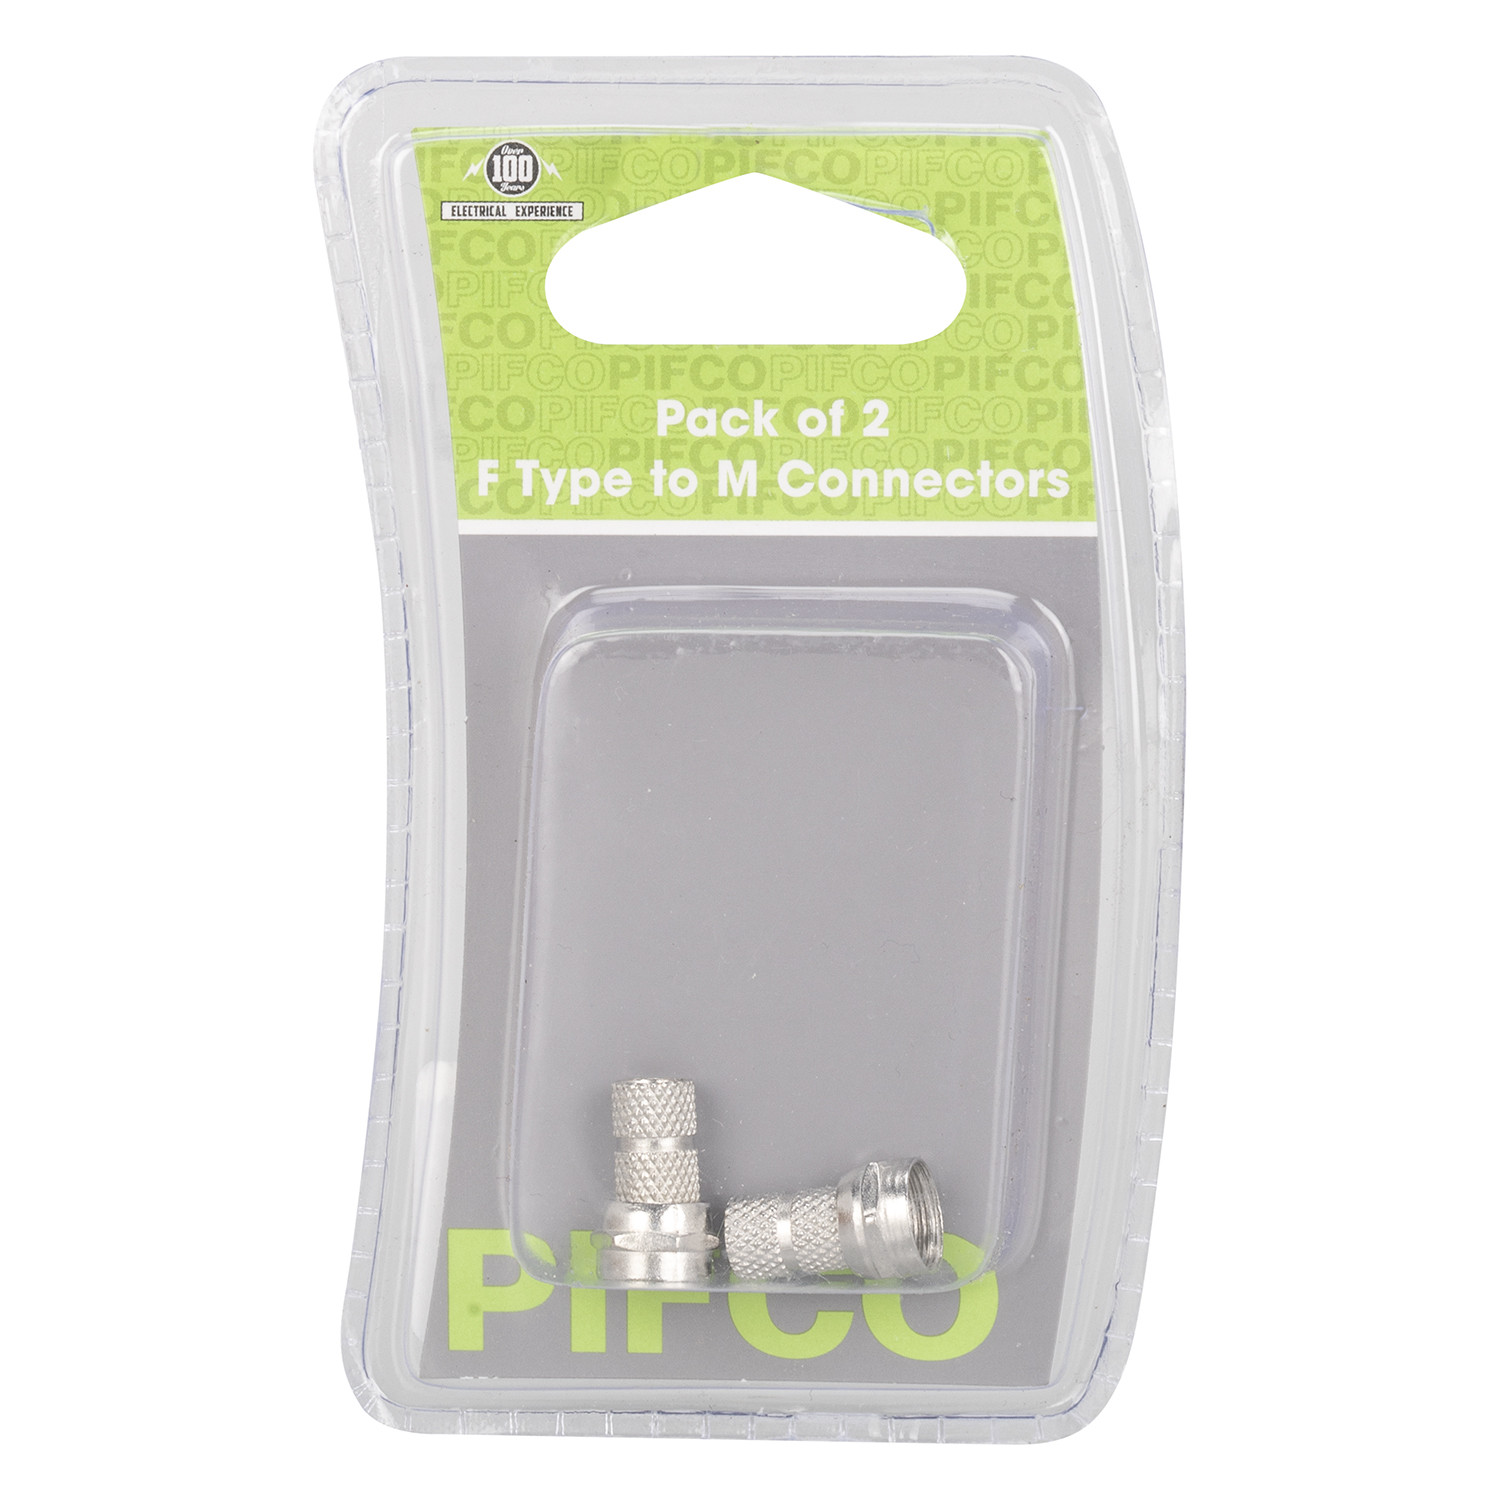 Pifco Type F Male Connectors 2 Pack Image